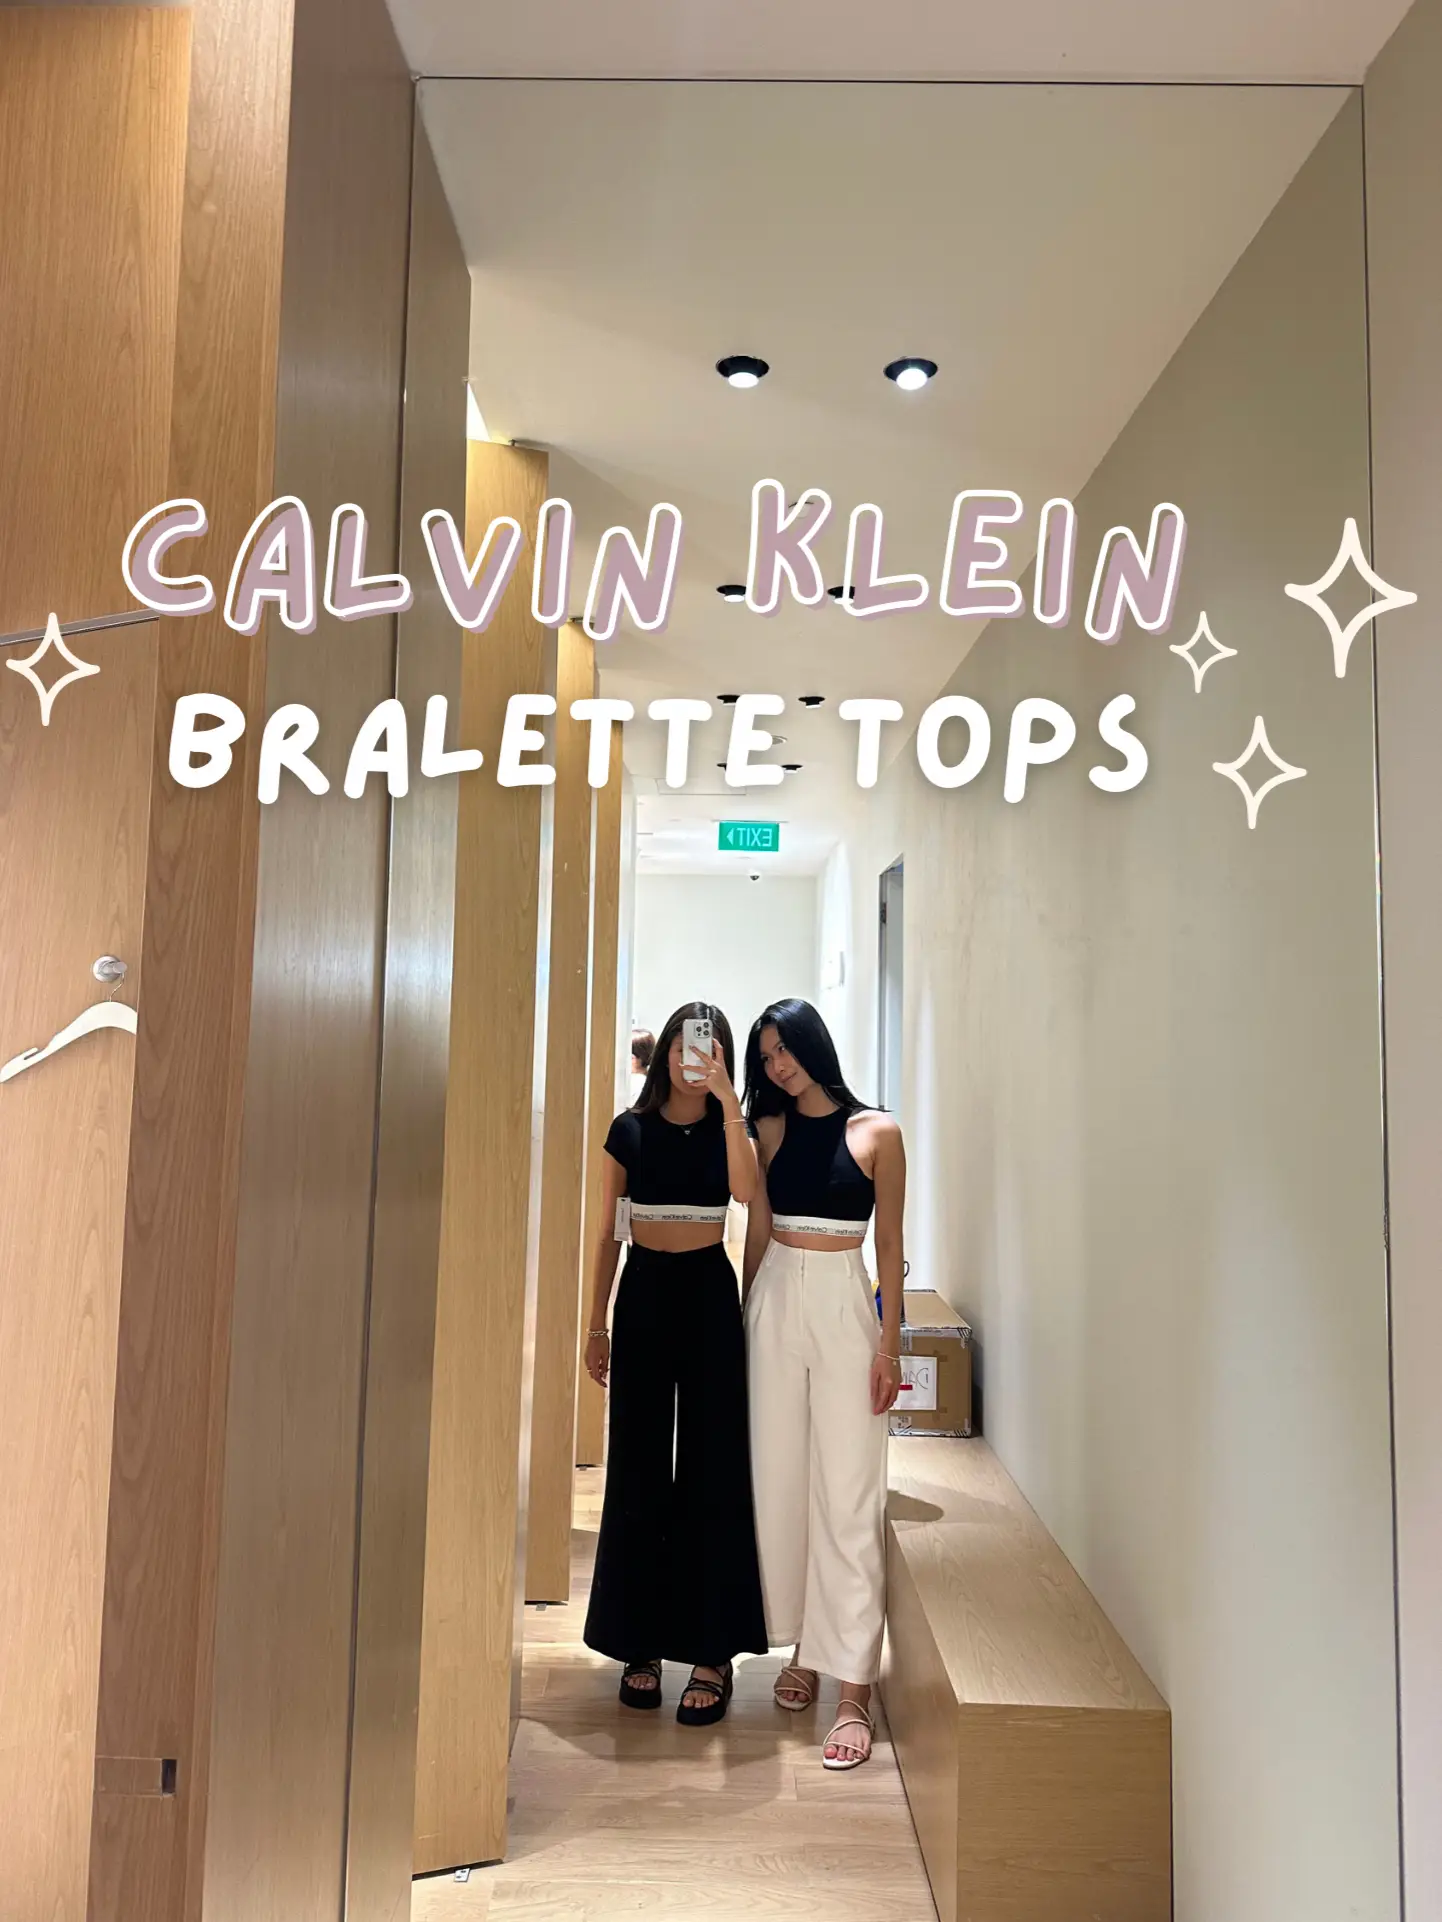 ₊˚ CUTEST CALVIN KLEIN PADDED BRALETTE TOPS . ˚◞, Gallery posted by yuki  ⋆˚✿˖°